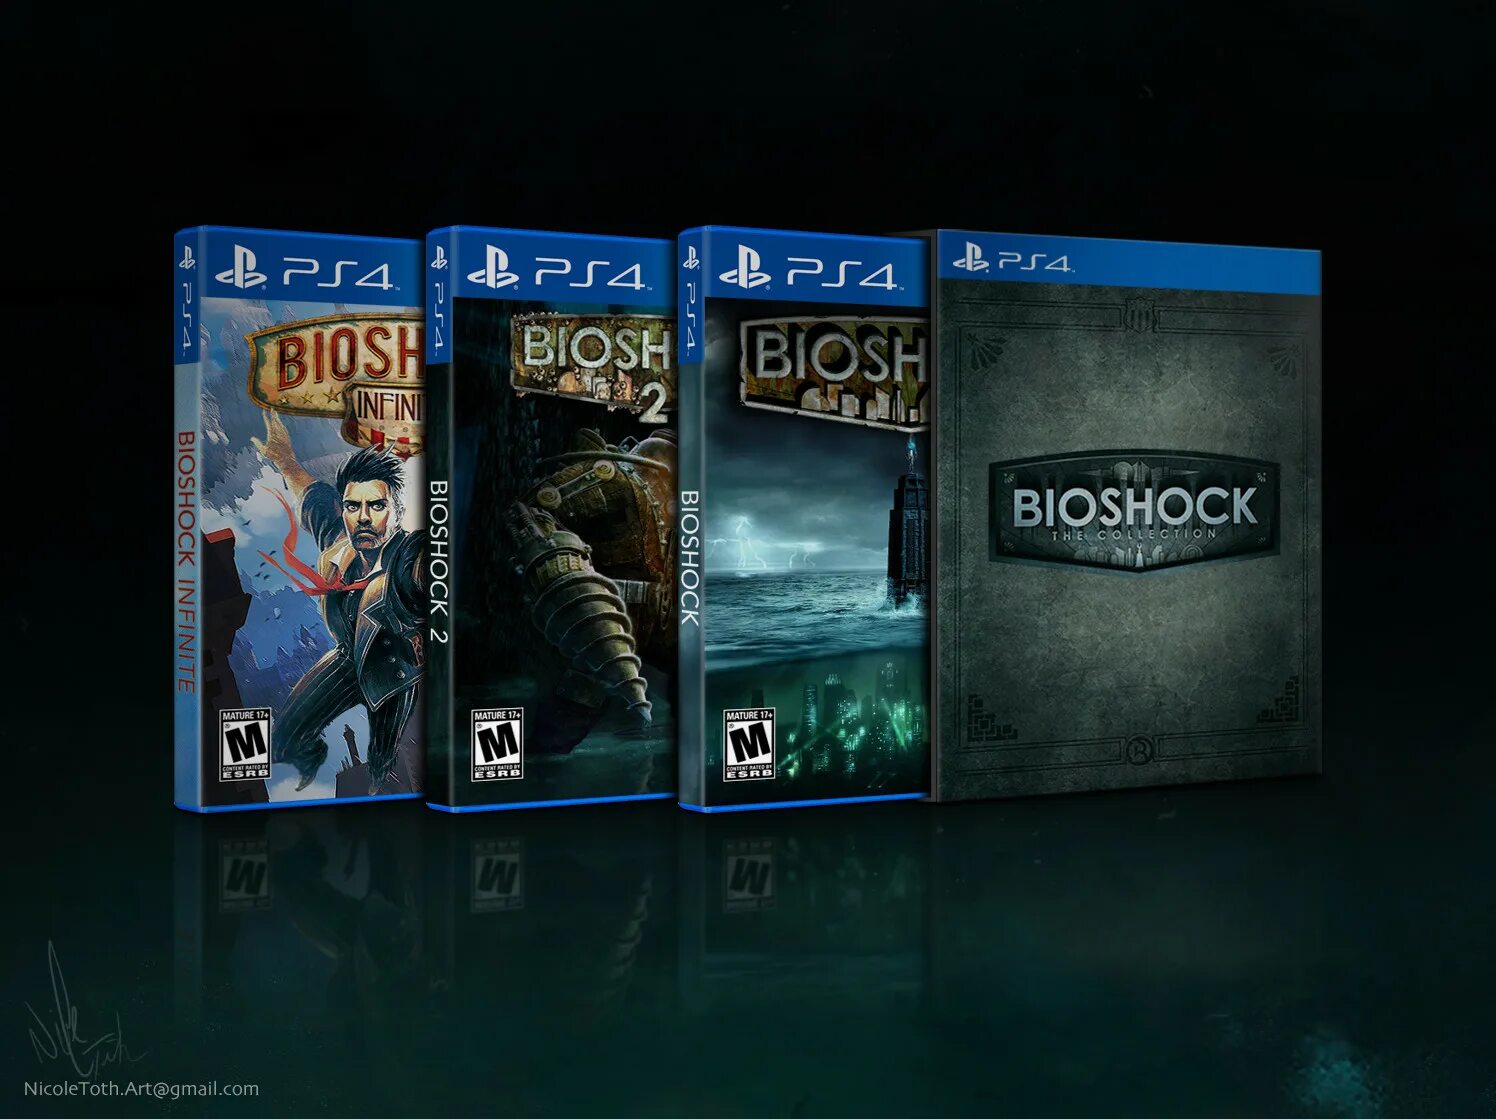 Ps4 collection купить. Bioshock: the collection (ps4). Диск биошок на пс4. Биошок игра на пс4. Игра Bioshock на PLAYSTATION 4.